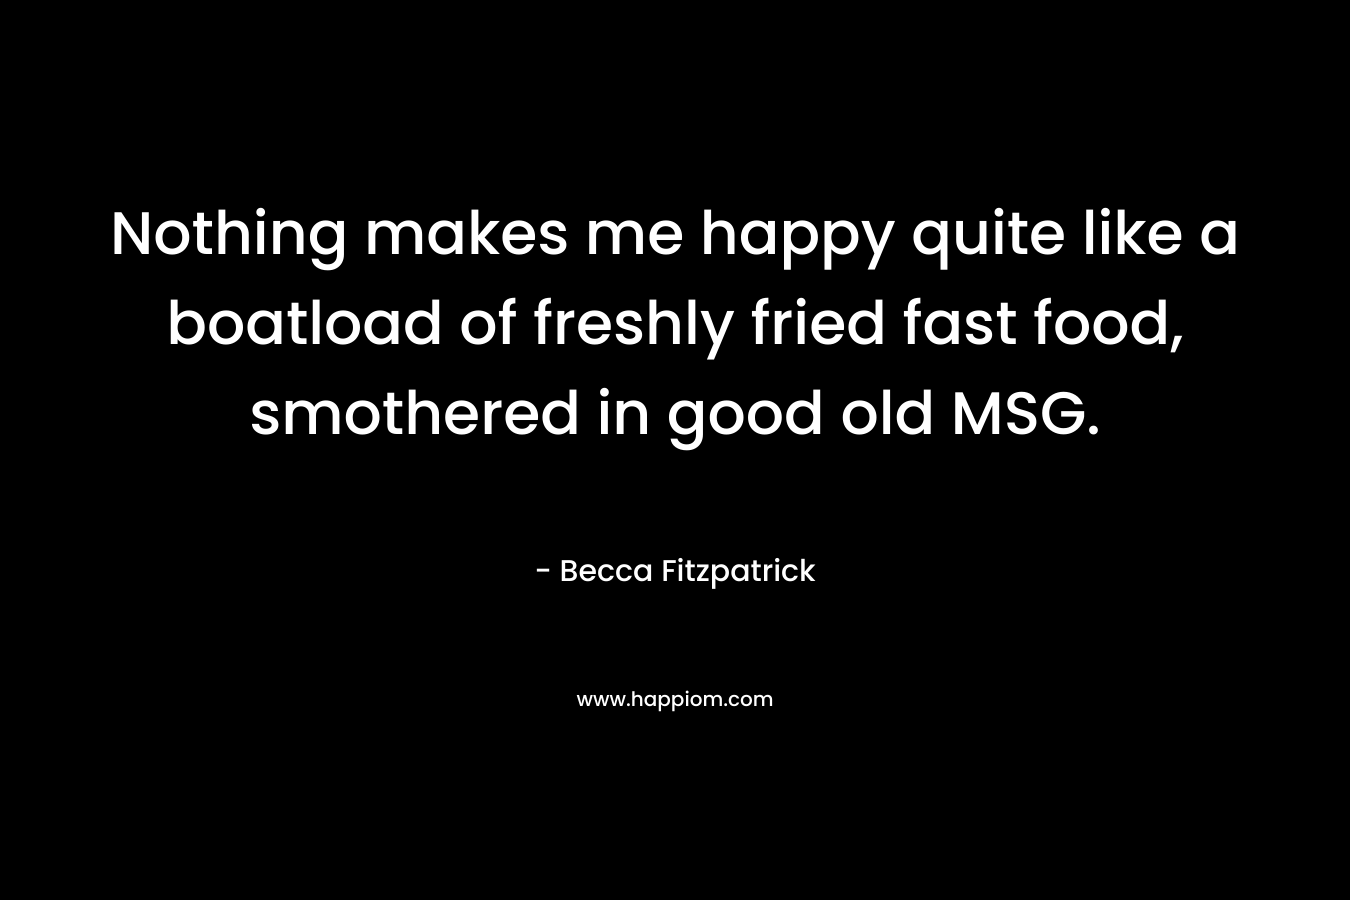 Nothing makes me happy quite like a boatload of freshly fried fast food, smothered in good old MSG. – Becca Fitzpatrick